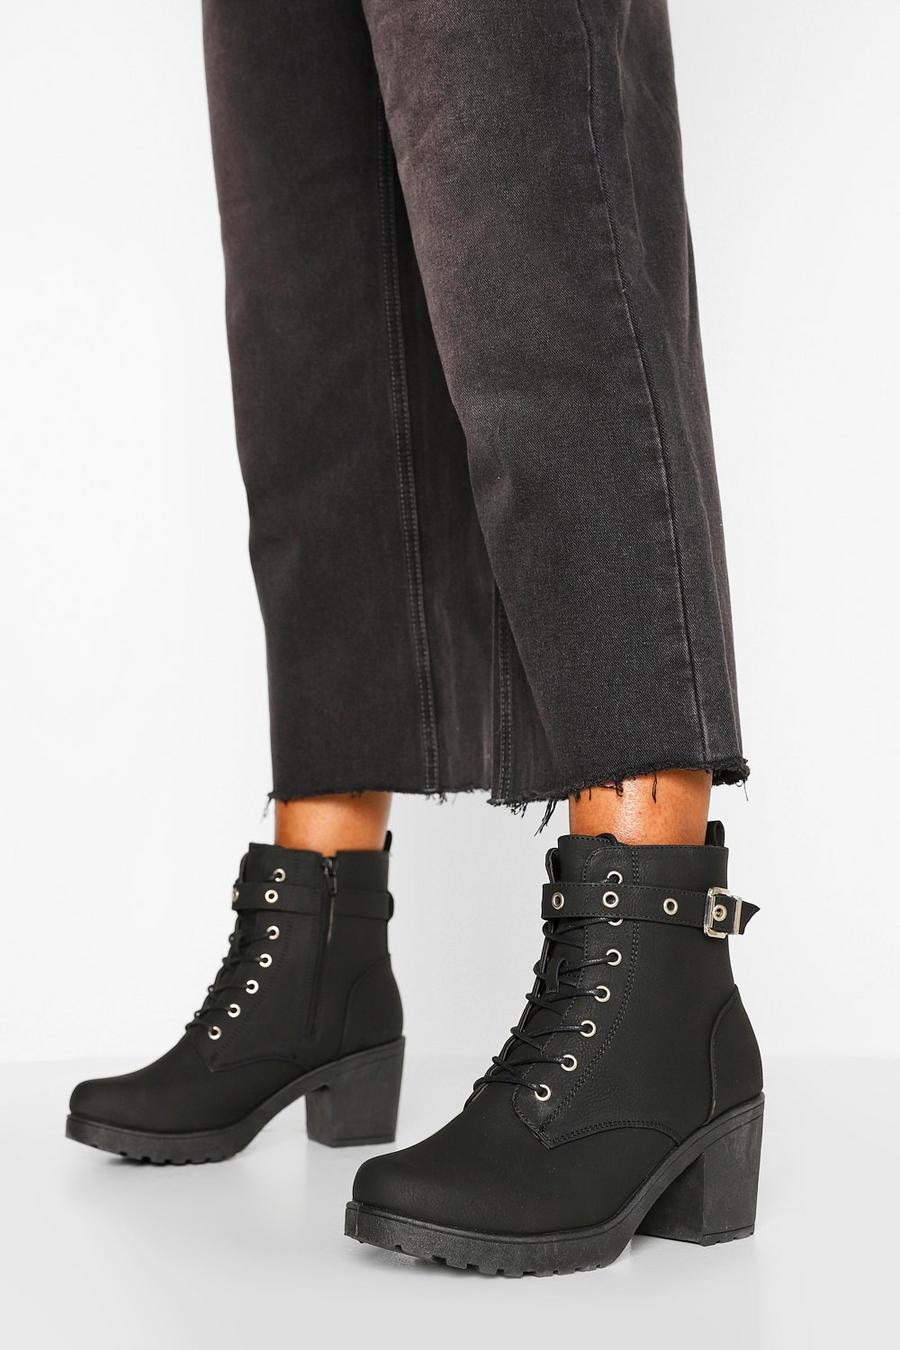 Black noir Wide Fit Buckle Lace Up Chunky Hiker Boots